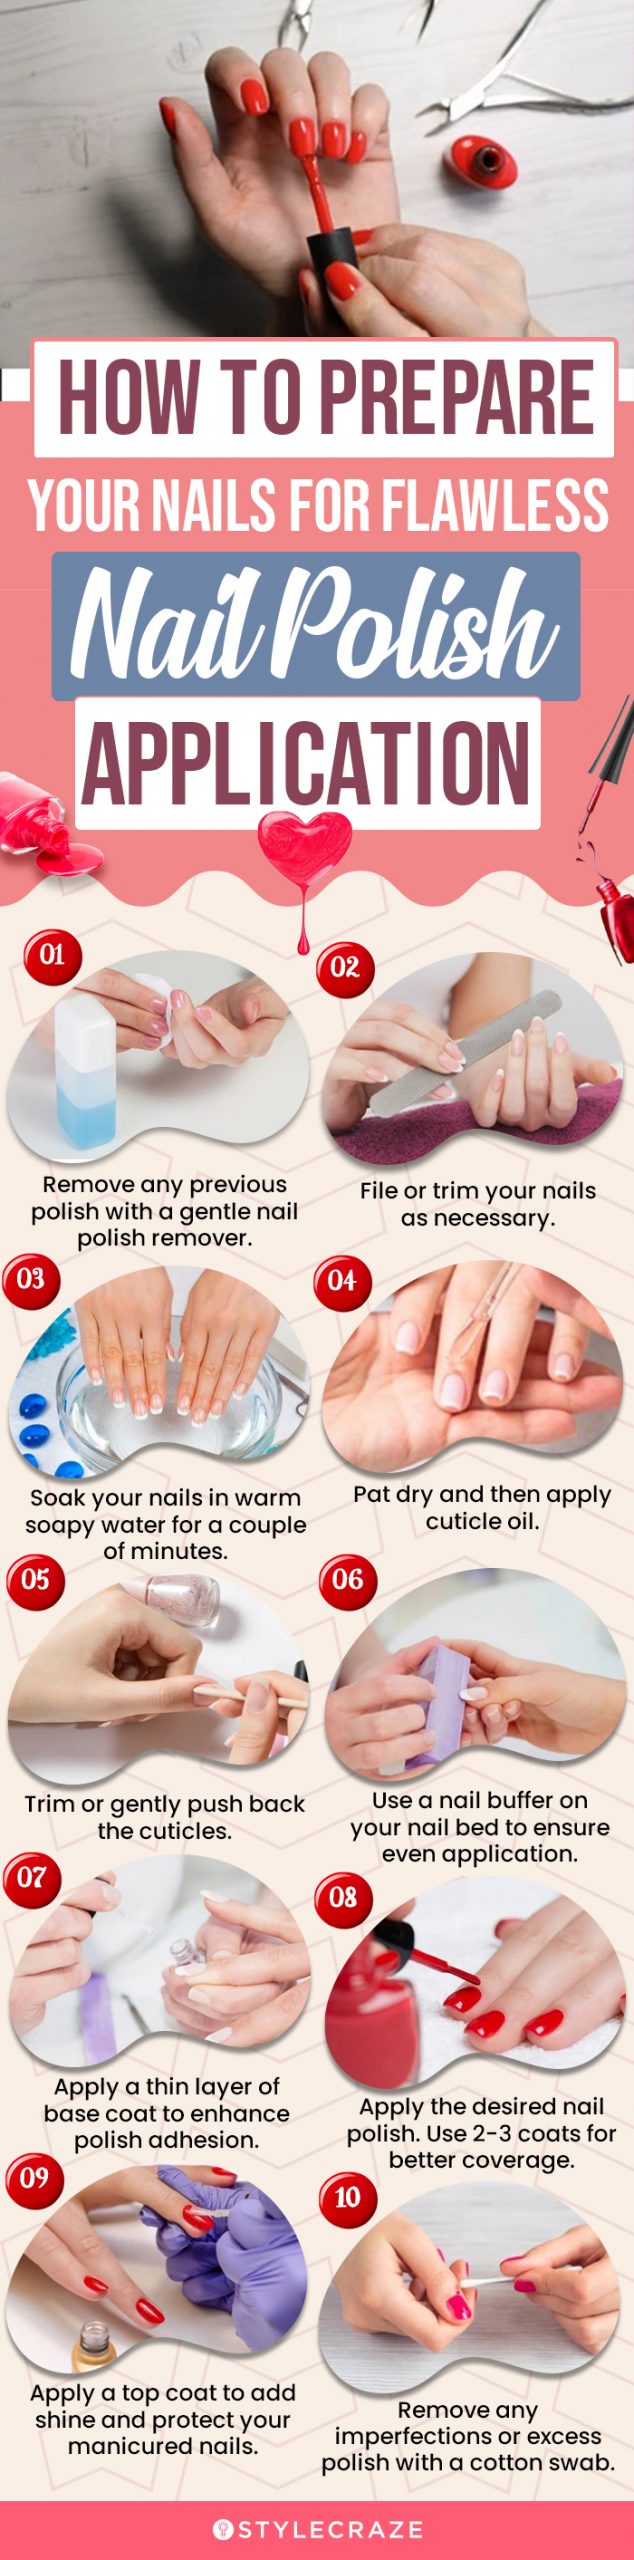 How To Prepare Your Nails For Flawless Nail Polish Application (infographic)